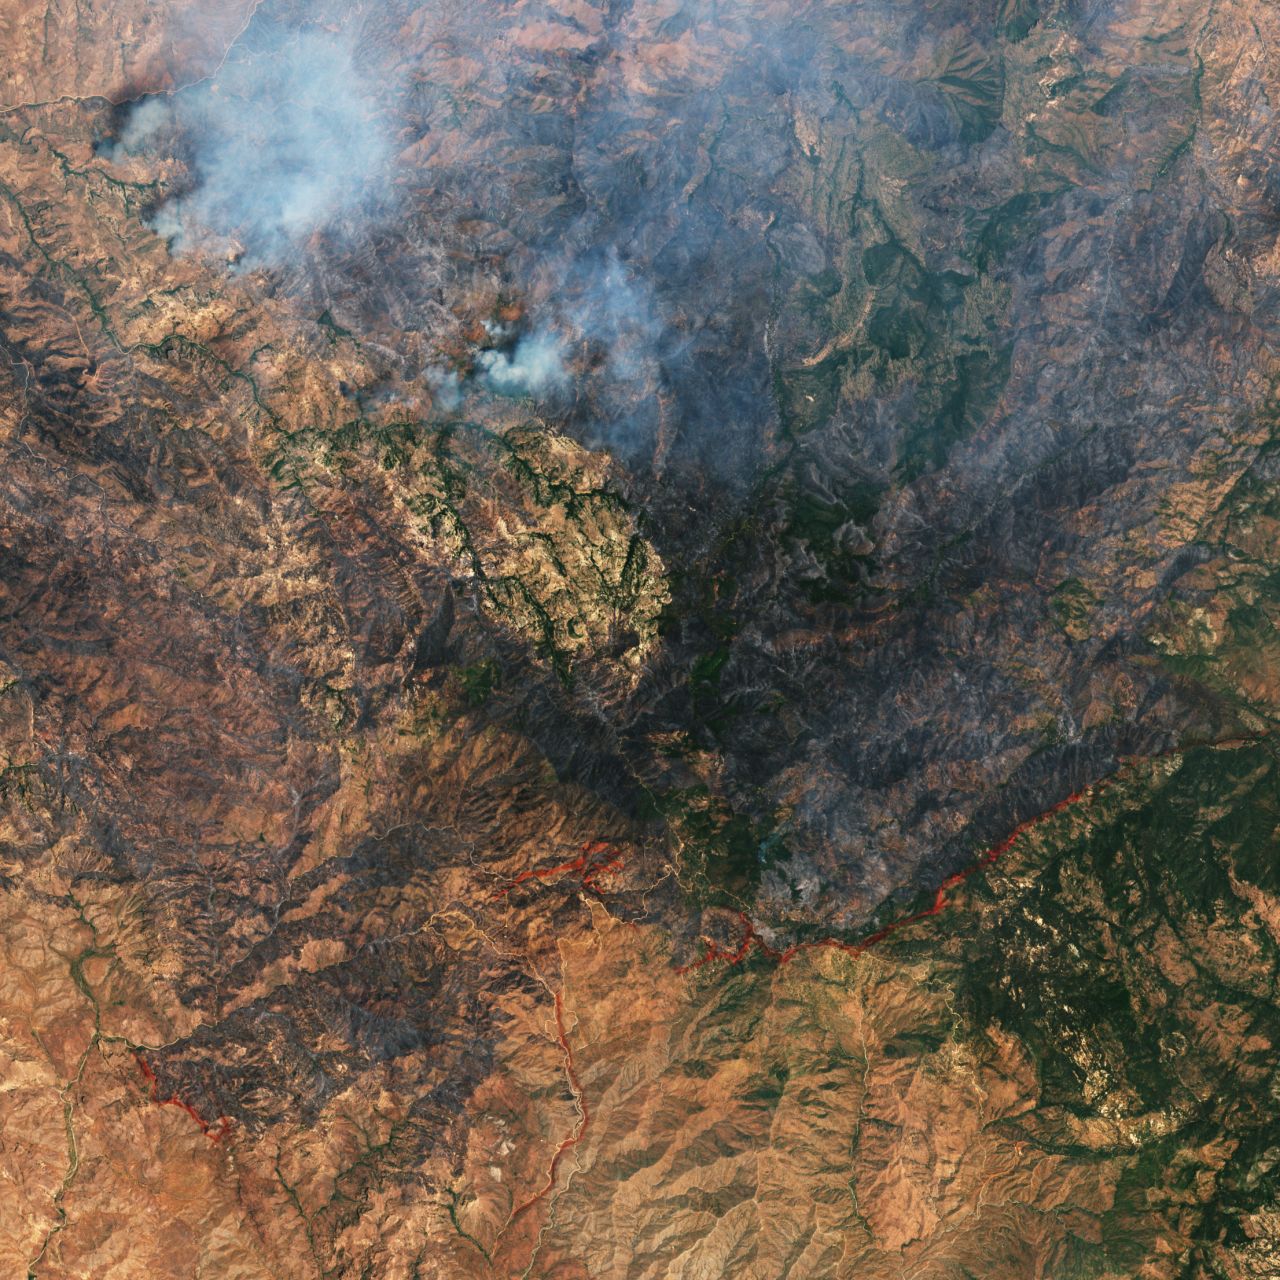 This image from a Copernicus Sentinel-2 satellite, from June 24, 2019, shows wildfires east of Phoenix, Arizona. It also shows the red lines of flame retardant sprayed from aircraft and colored red so firefighters can see it. The climate crisis is <a href="https://edition.cnn.com/2020/08/24/weather/california-wildfires-climate-change/index.html" target="_blank">promoting wildfires throughout the western US</a>.  <br />